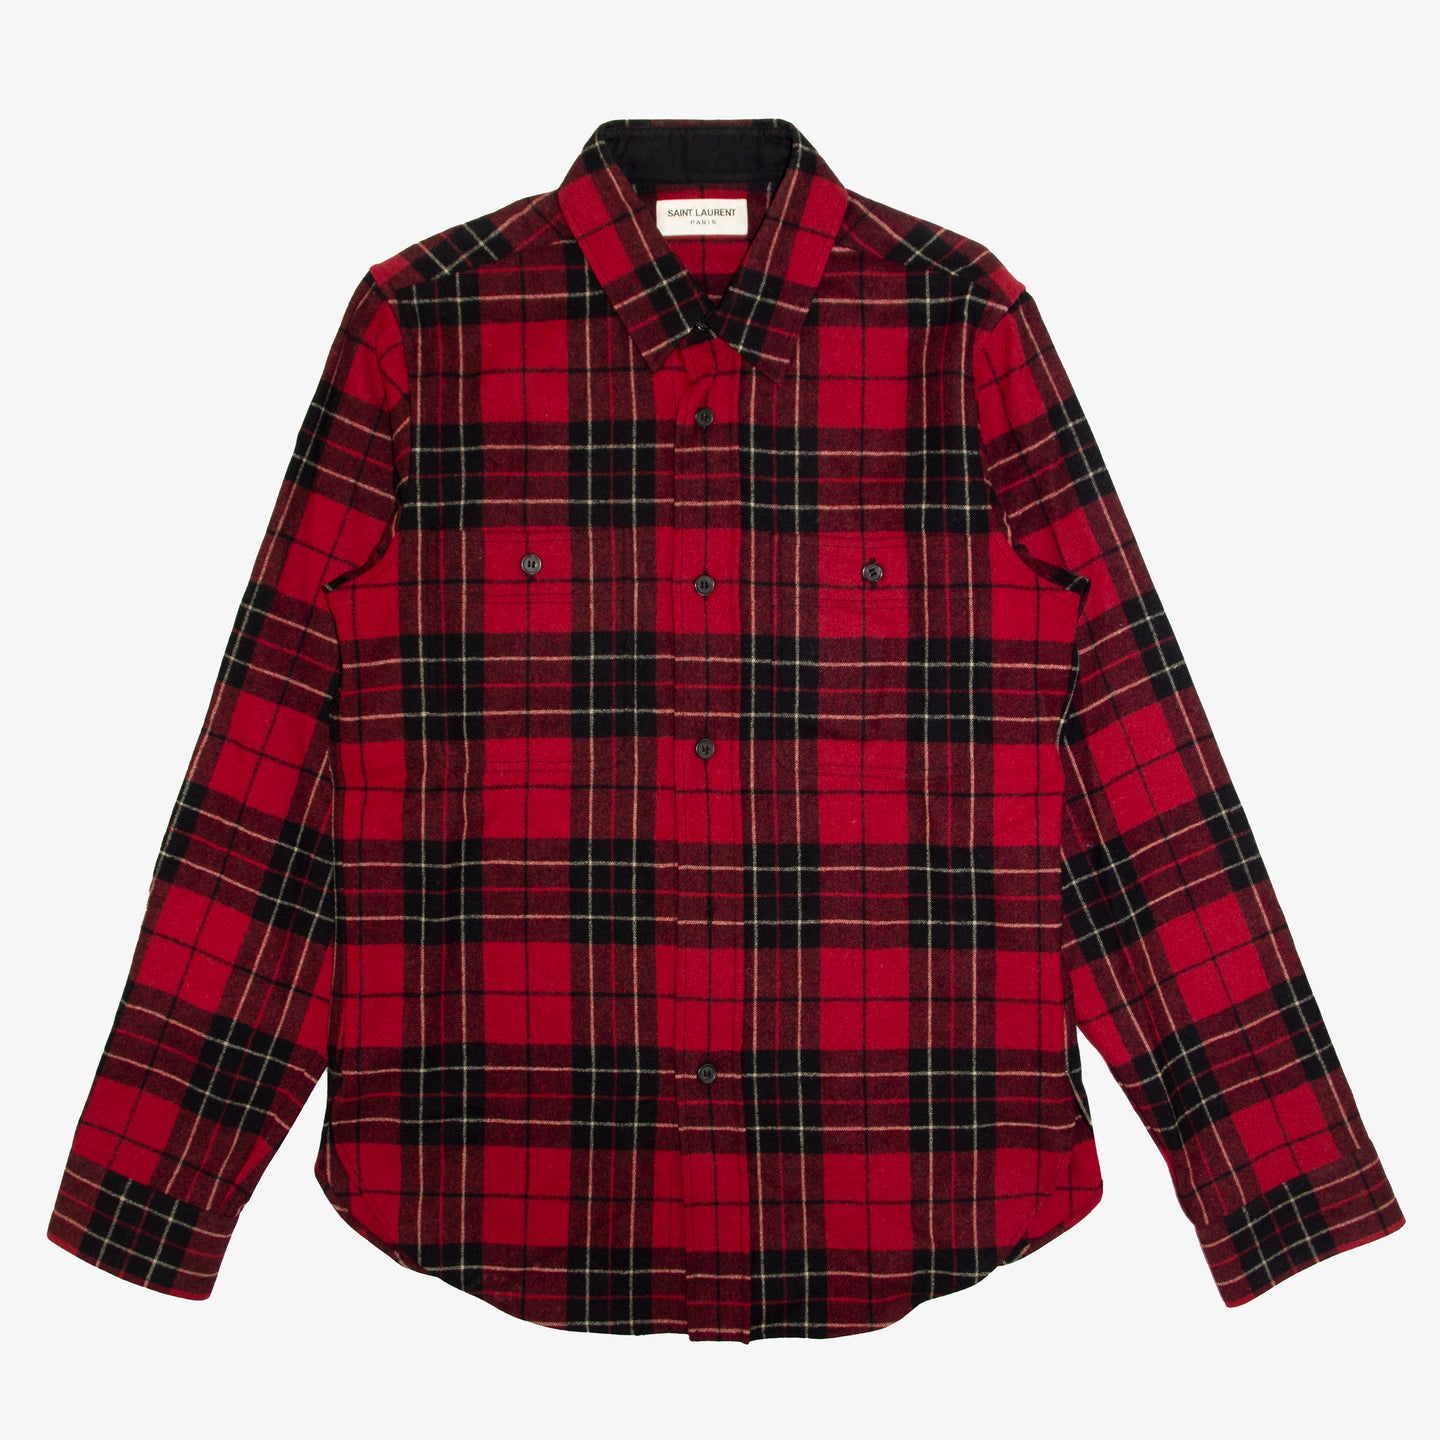 AW13 RUNWAY FLANNEL